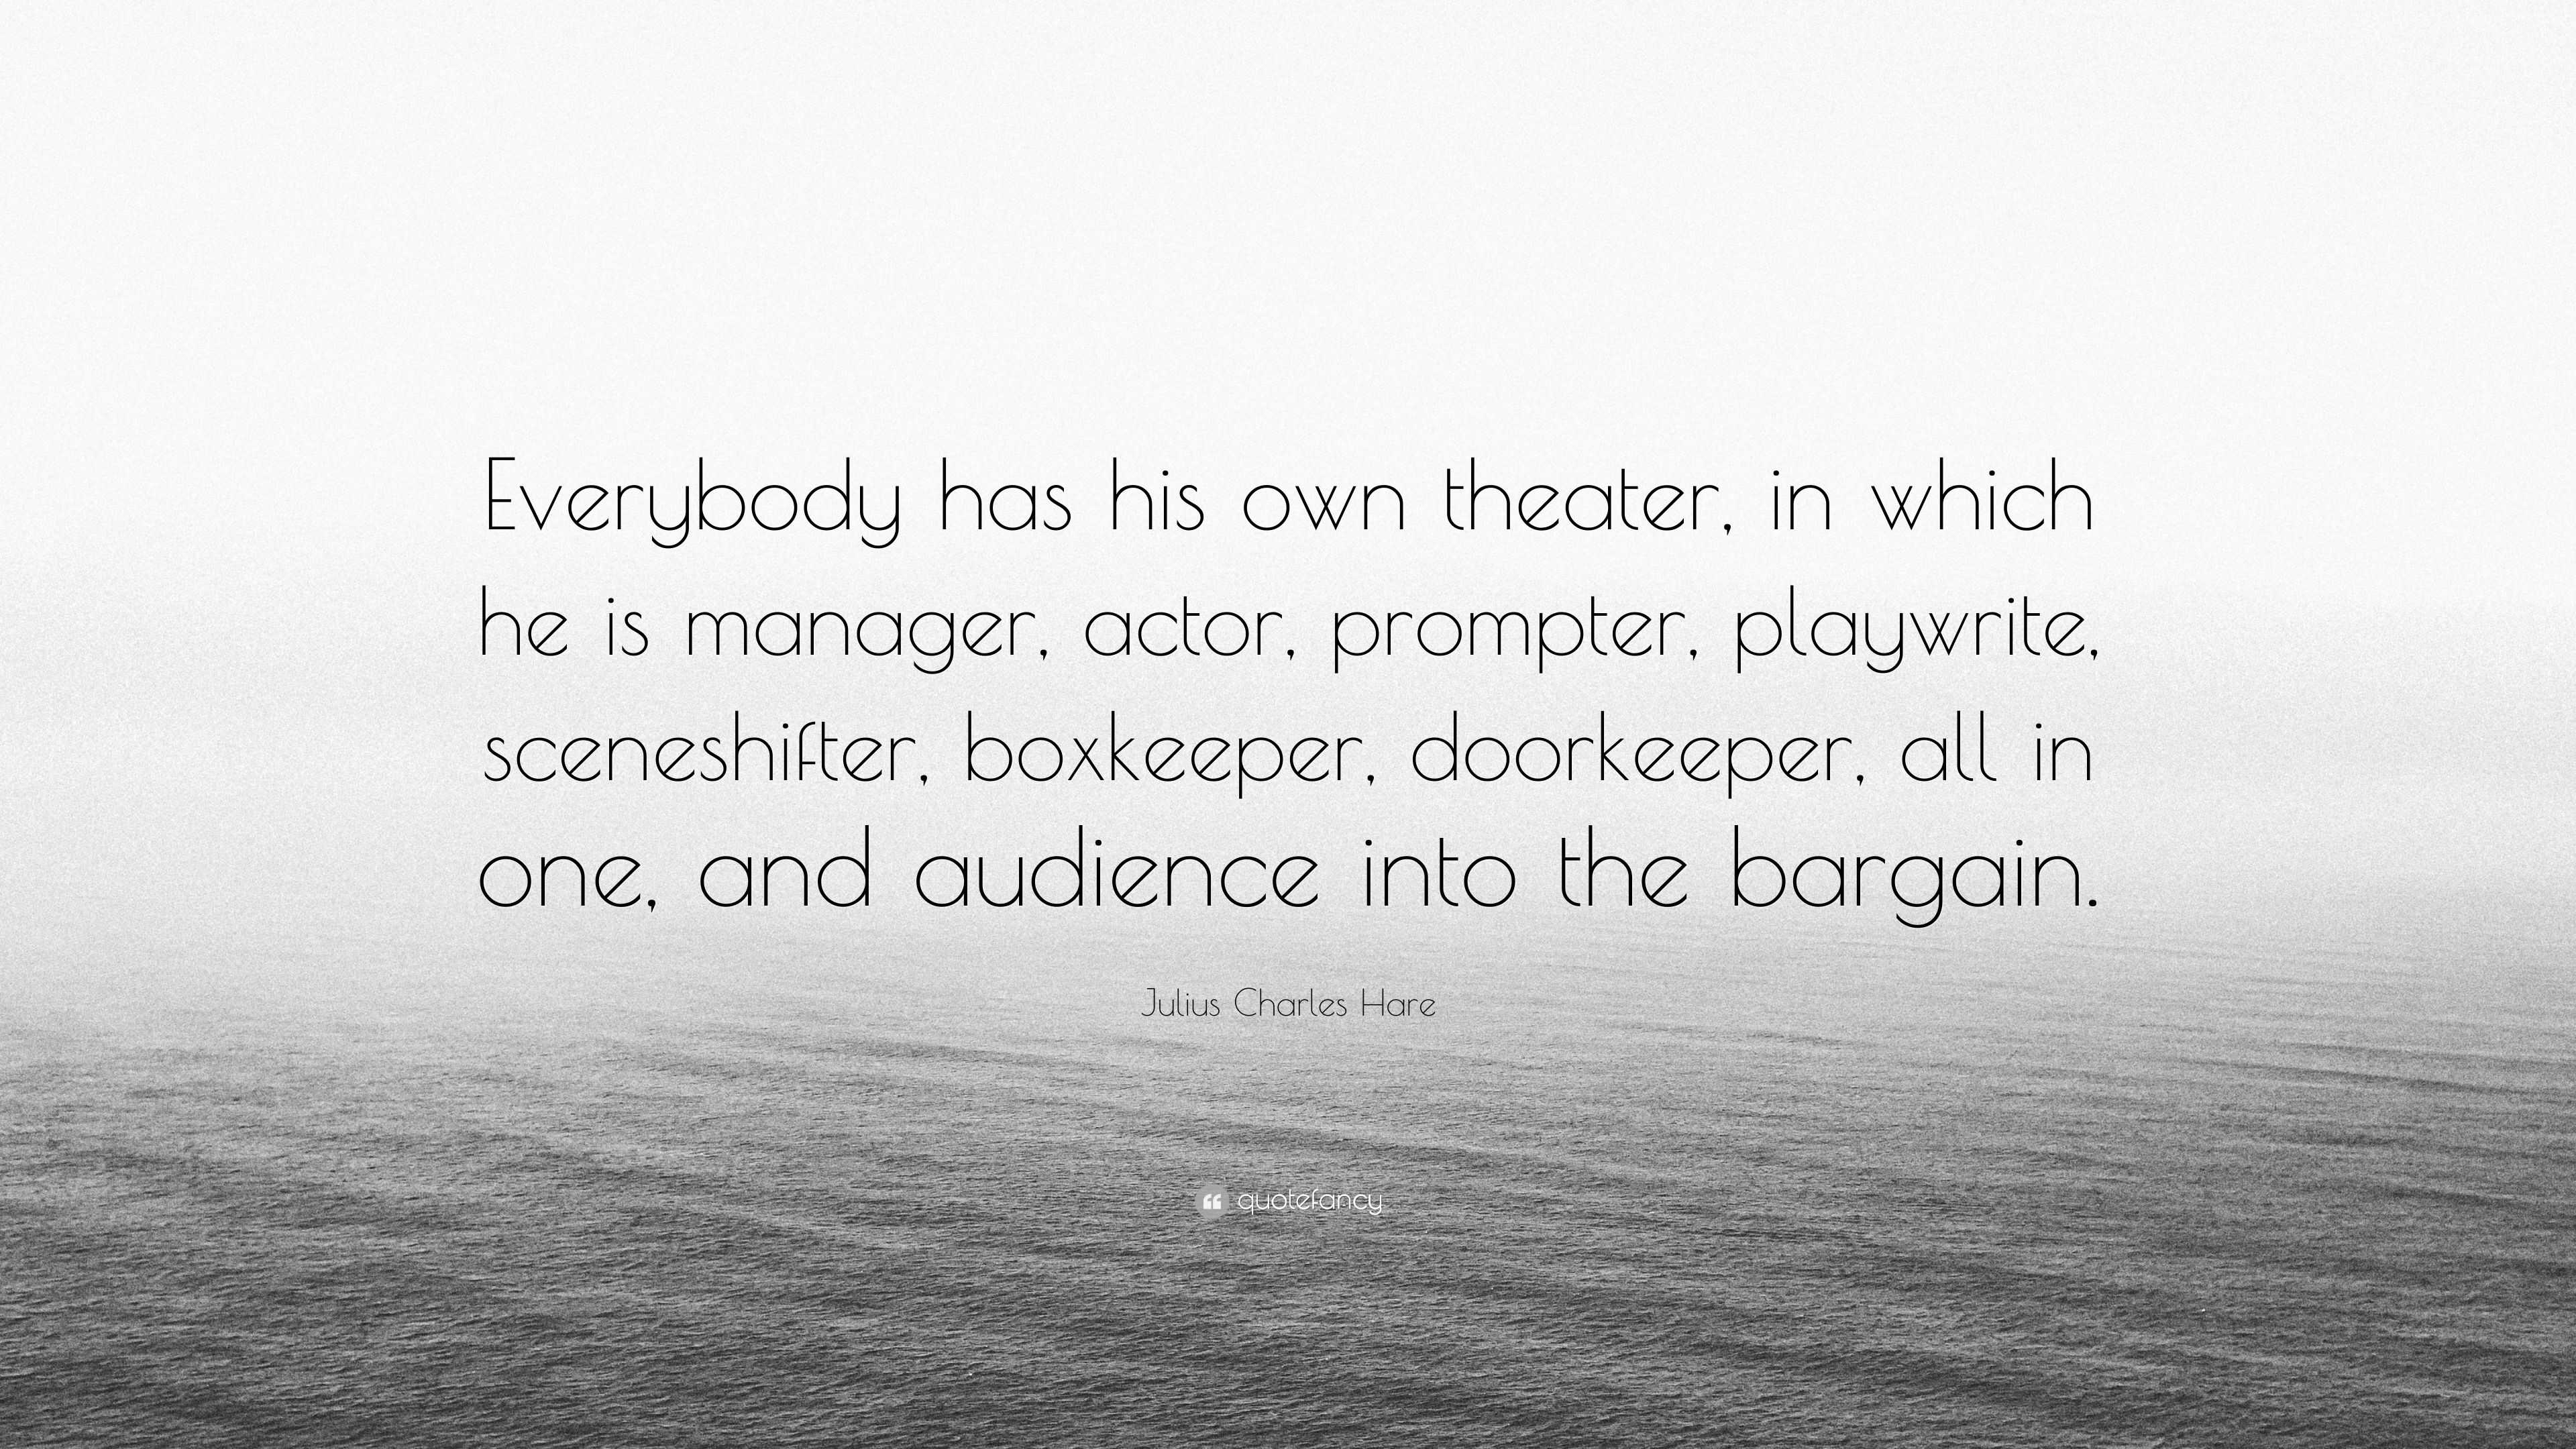 Julius Charles Hare Quote: “Everybody has his own theater, in which he ...